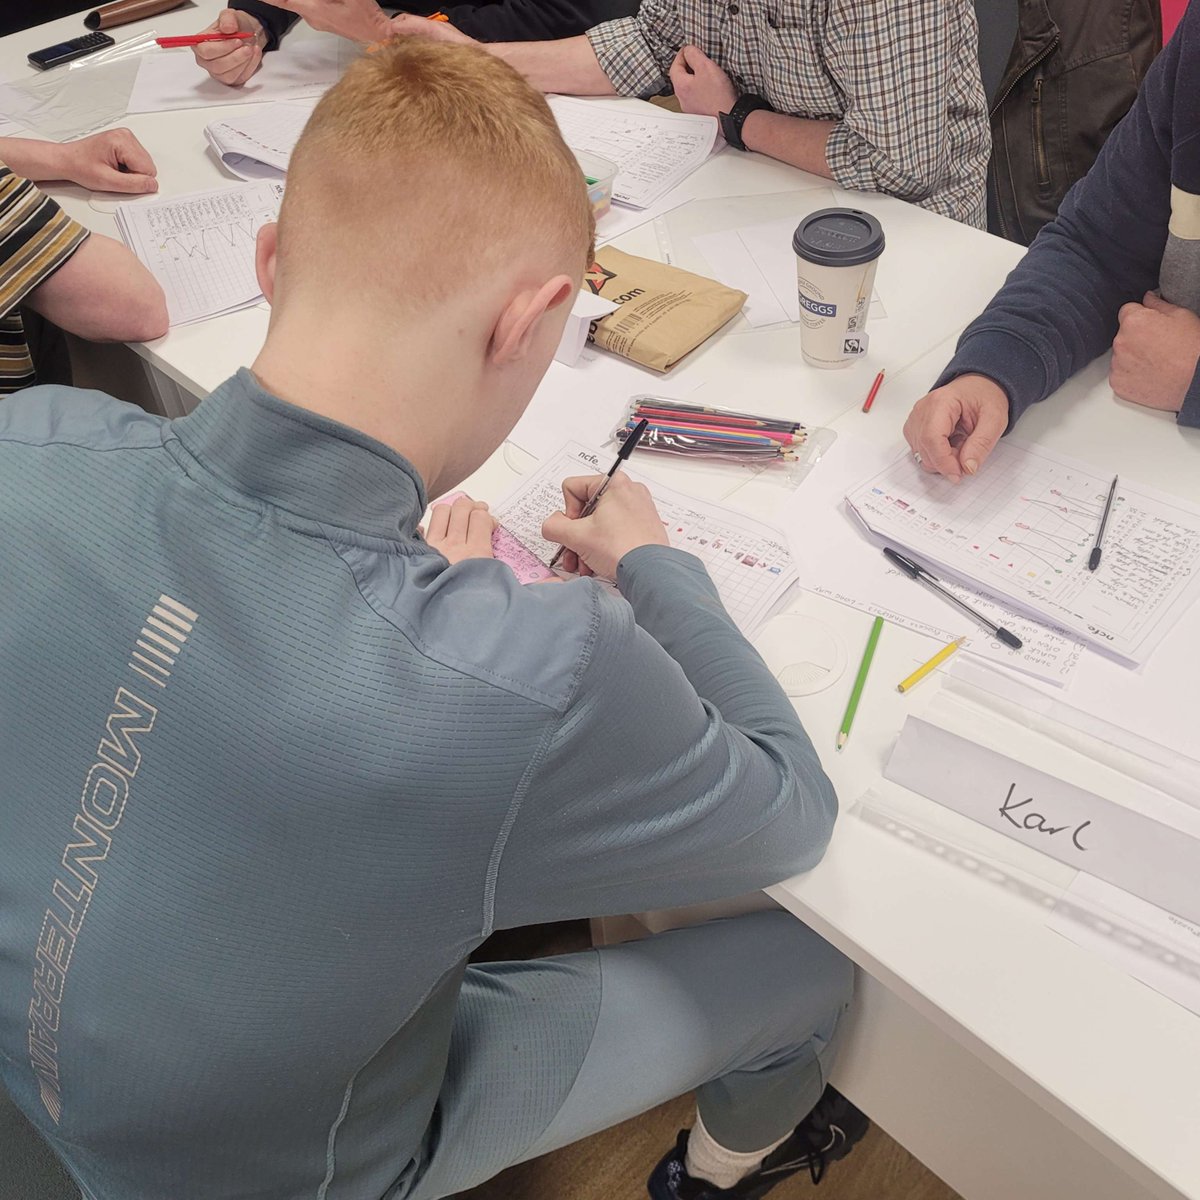 👷‍♂️Another Successful Lean & Warehousing Course!

Contact us if you would like to participate in this course get in touch:
📧 contact@upliftassociates.co.uk
☎️ 0191 500 1233 / 0191 563 4401

#leanandwarehousecourse #trainingprovider #sunderland